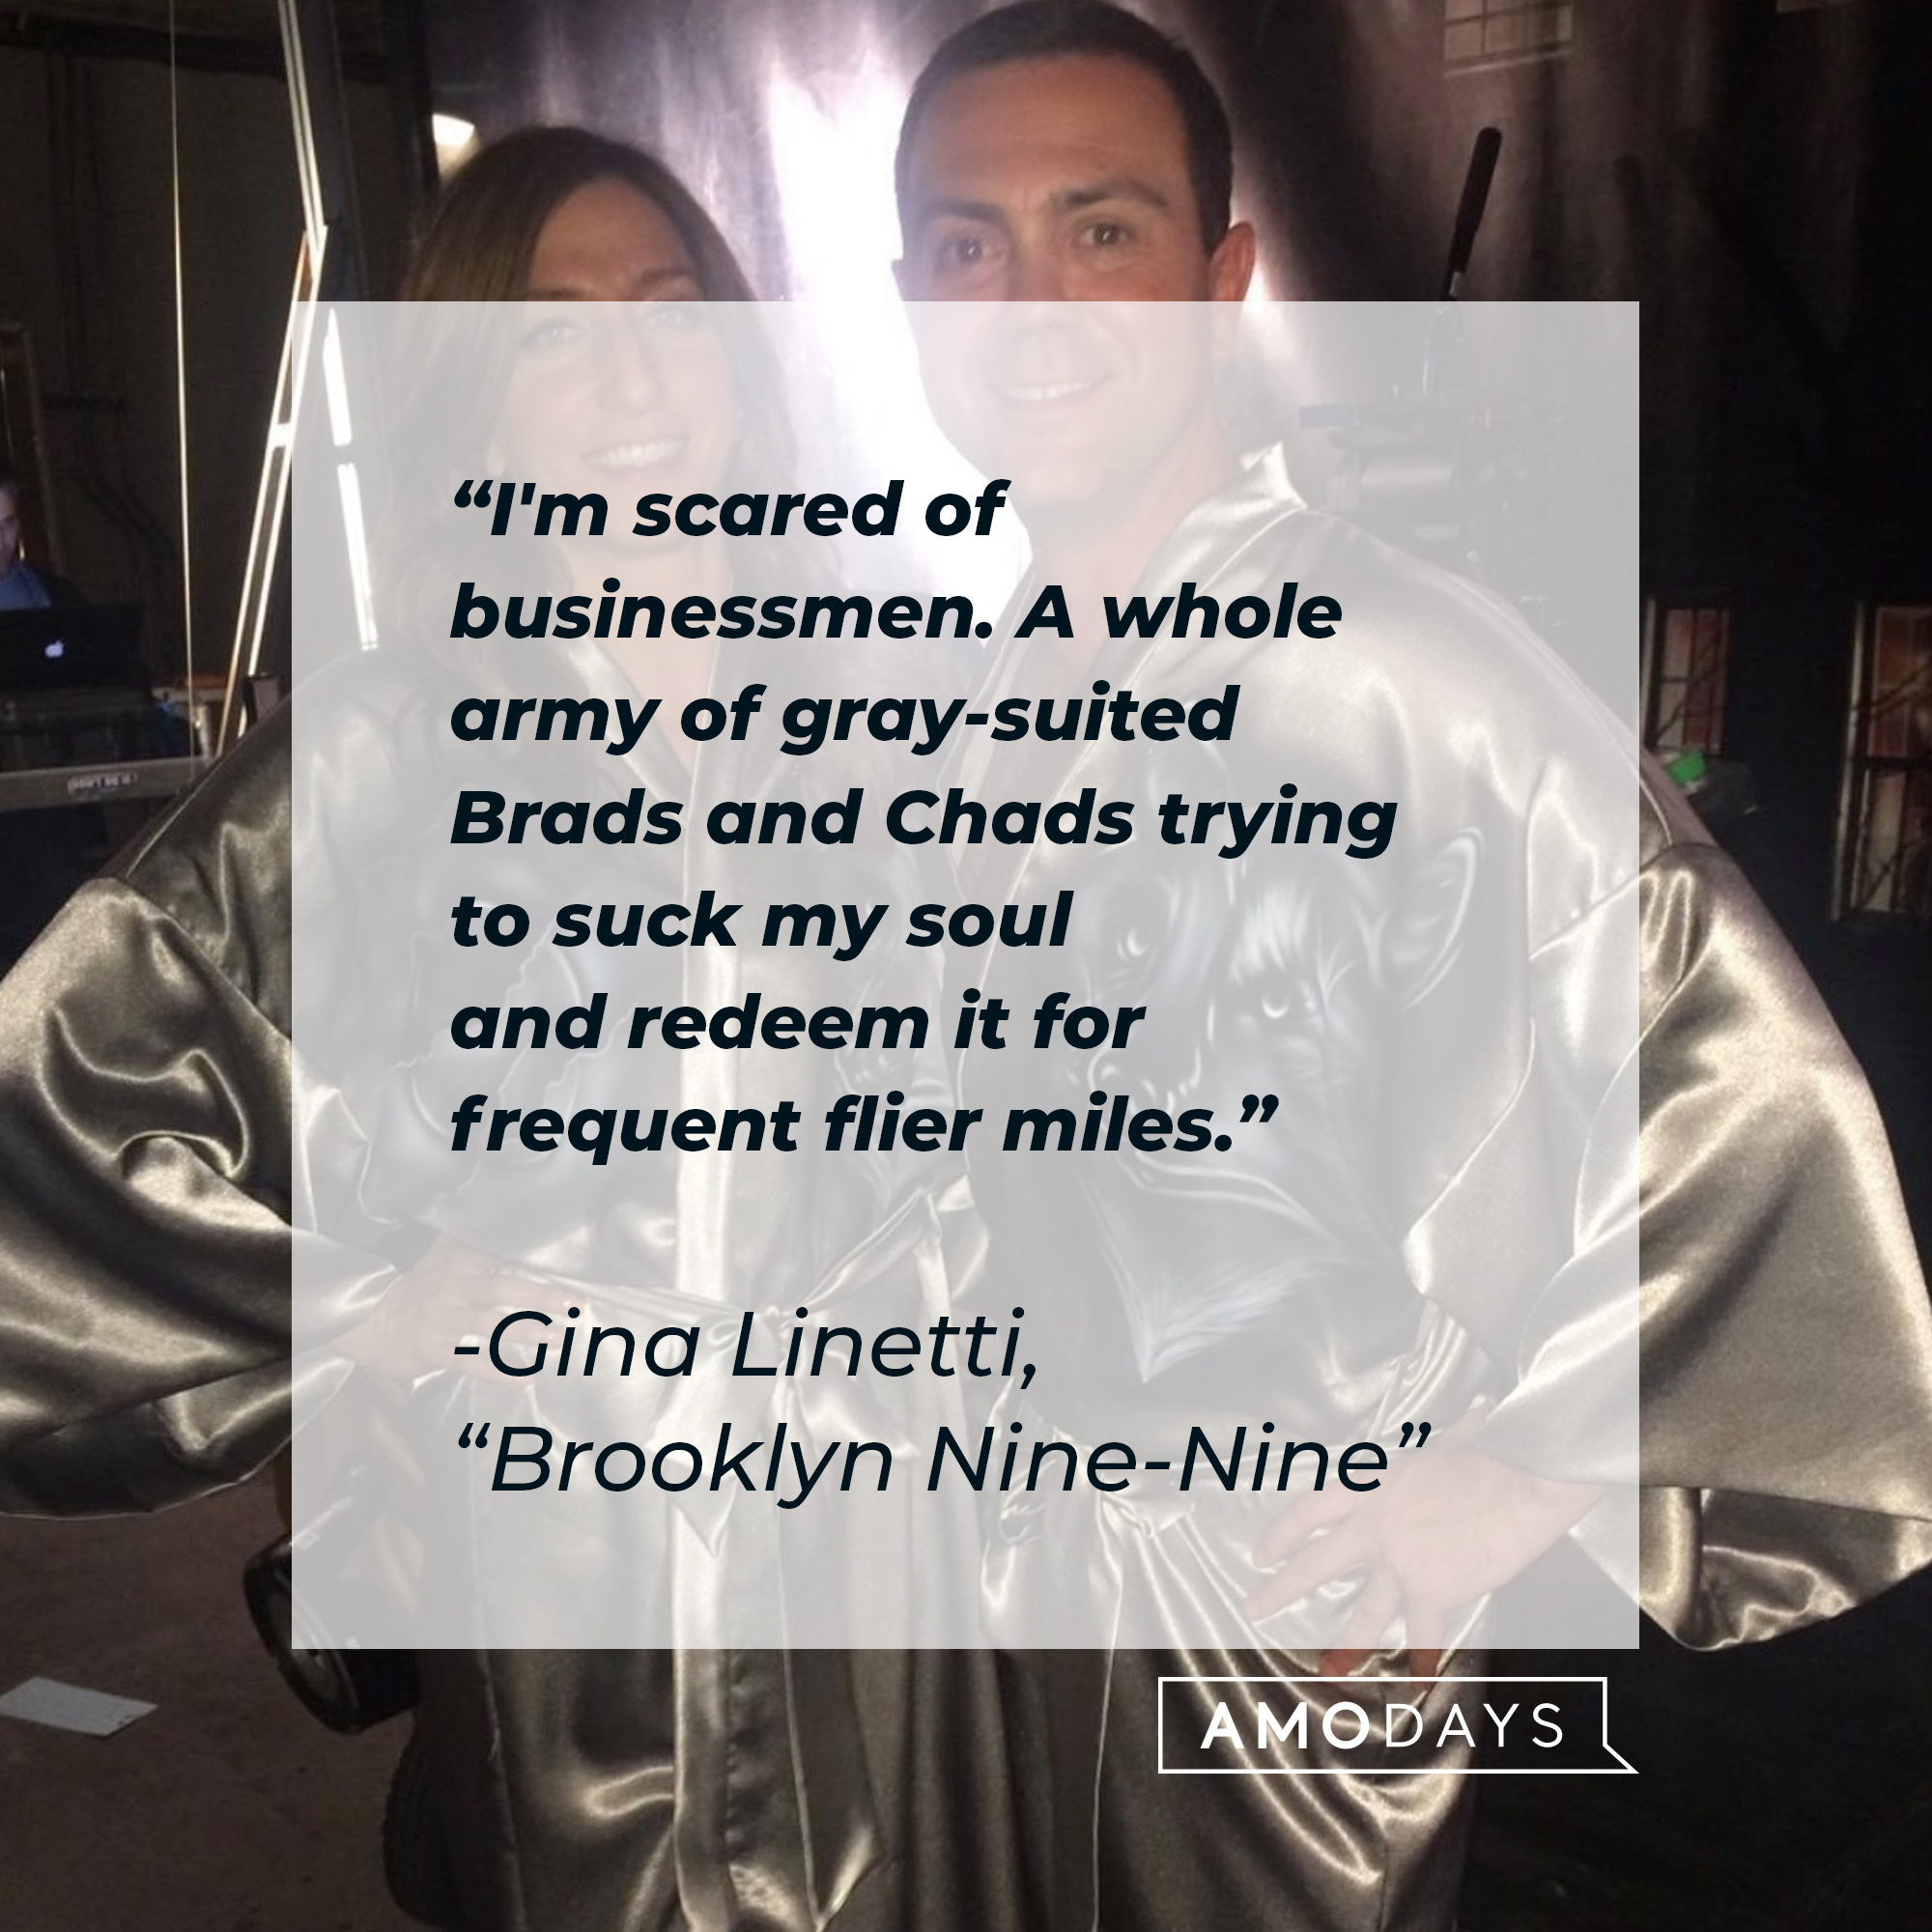 Gina Linetti with her quote: "I'm scared of businessmen. A whole army of gray-suited Brads and Chads trying to suck my soul and redeem it for frequent flier miles."  | Source: Facebook.com/BrooklynNineNine